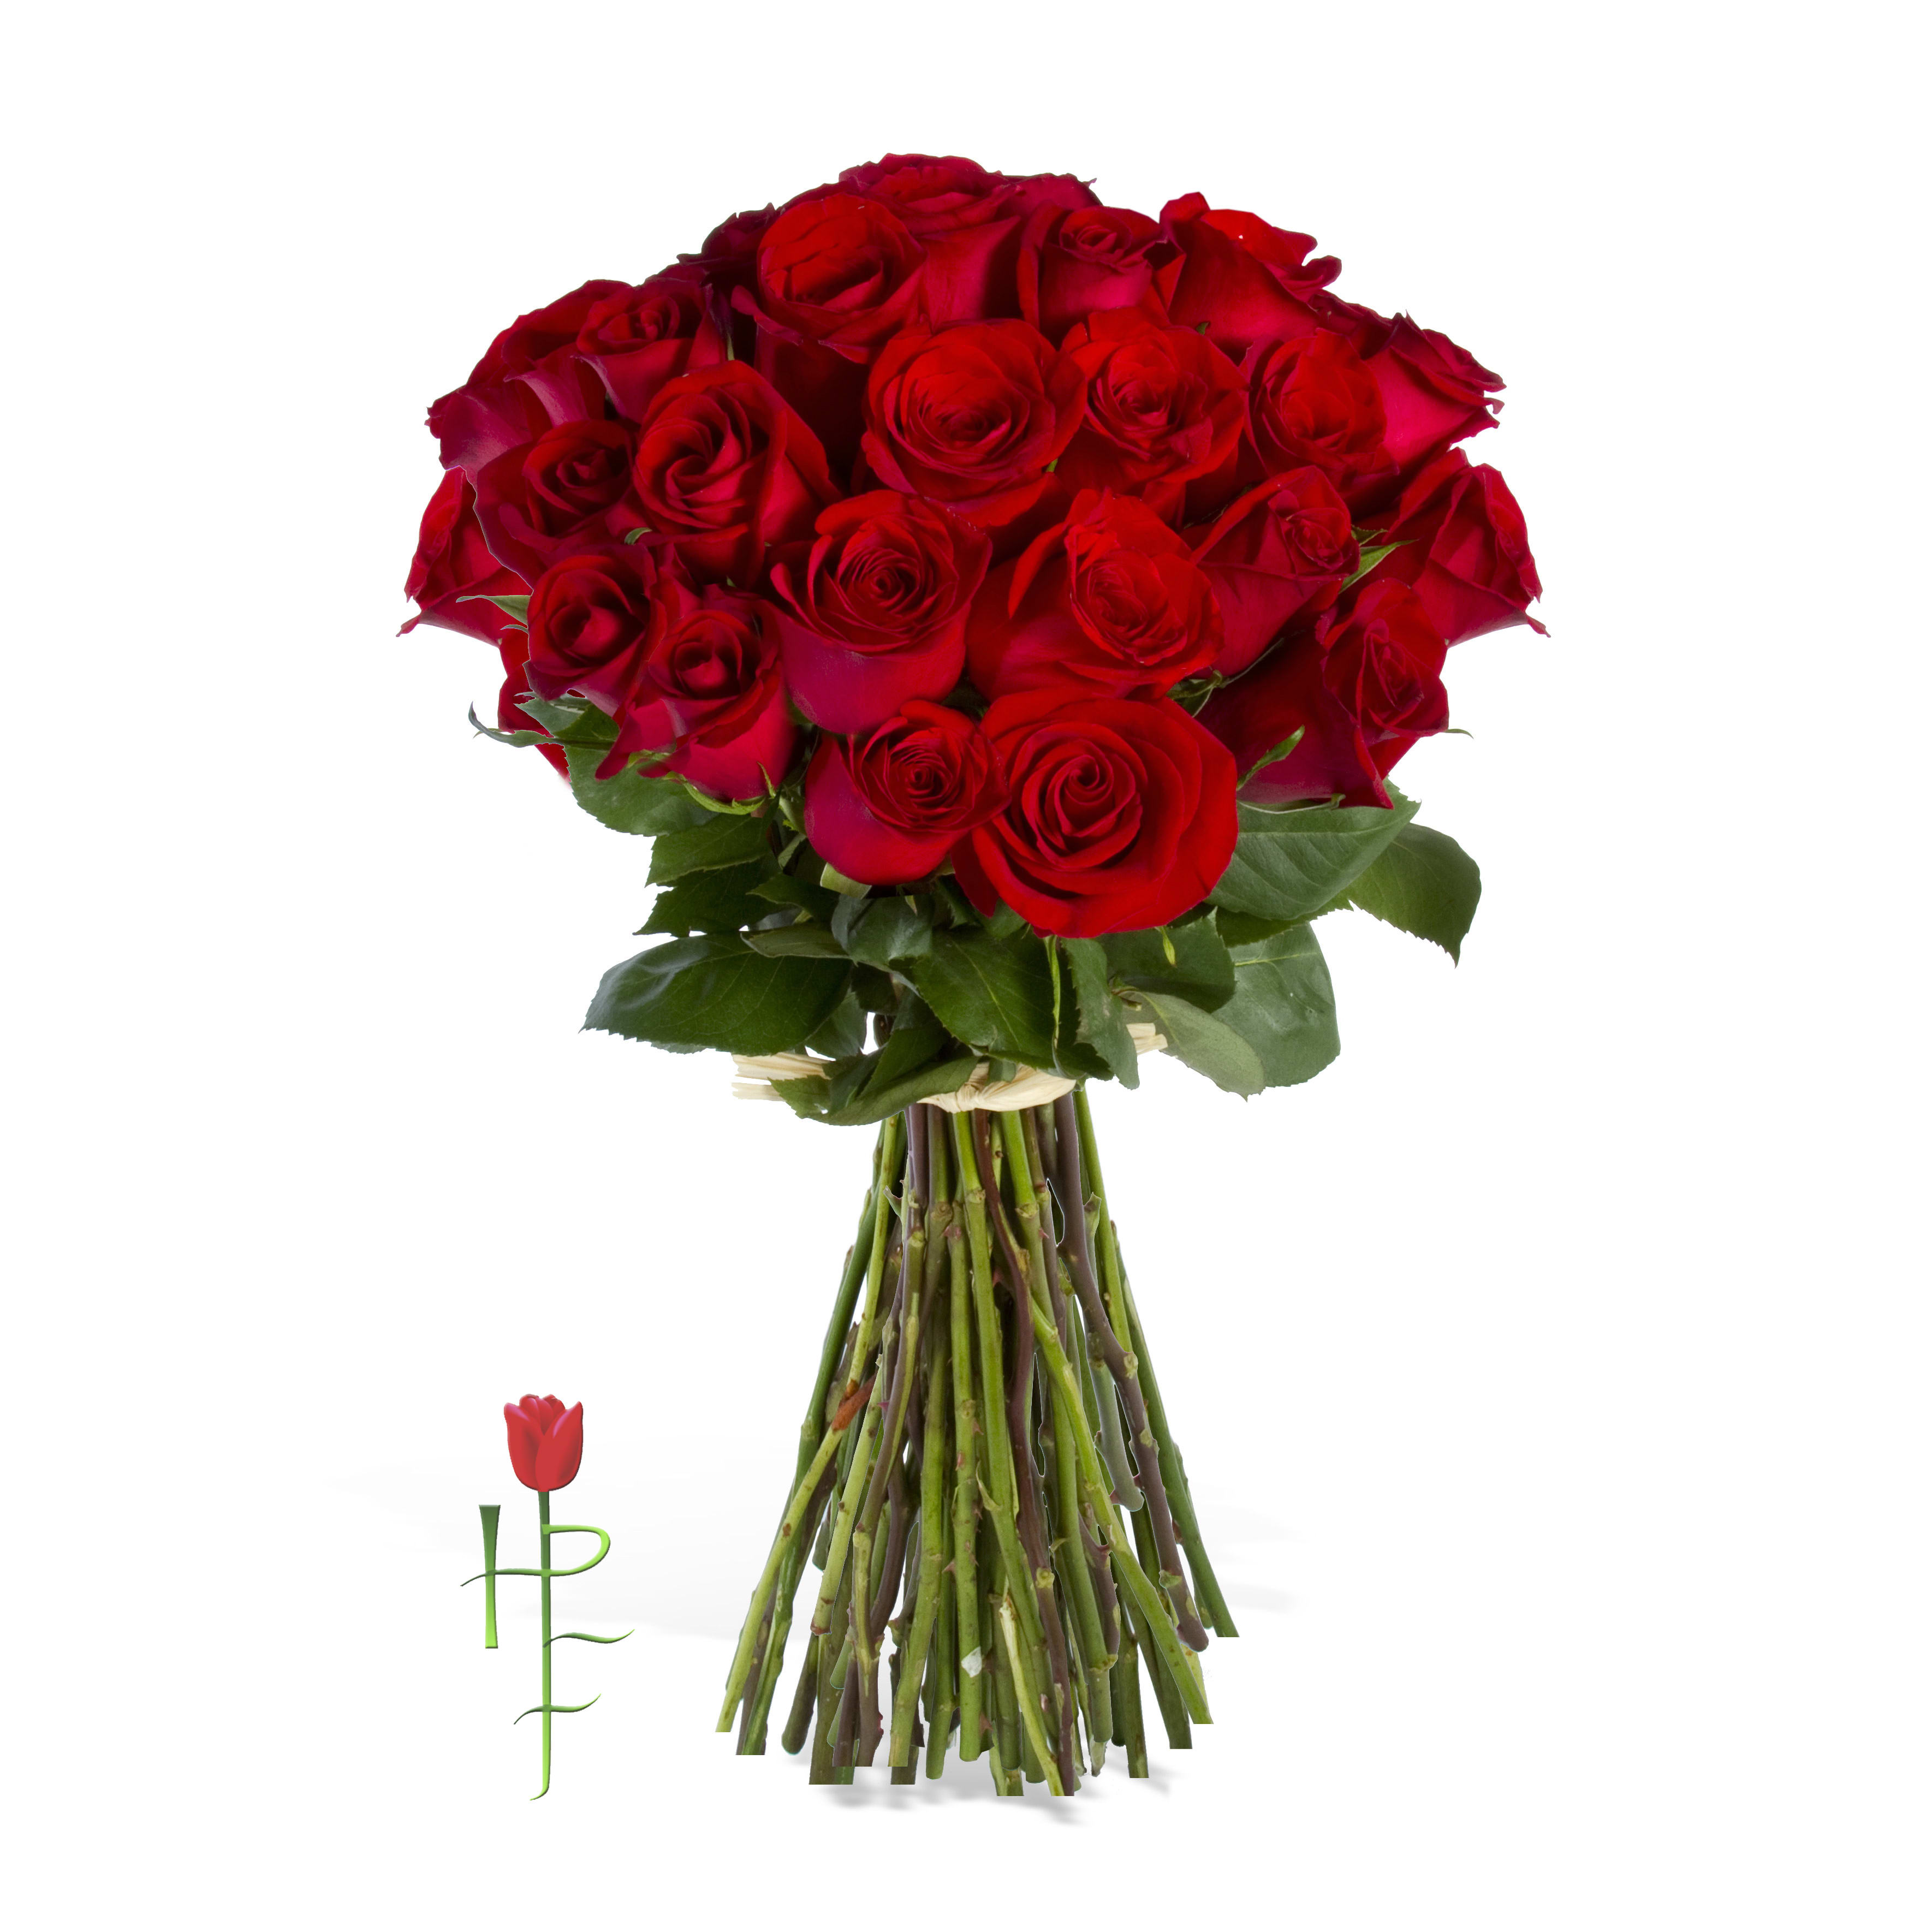 Rose Radiance - 24 long steam roses with green foliage arranged into a hand-tied bouquet.